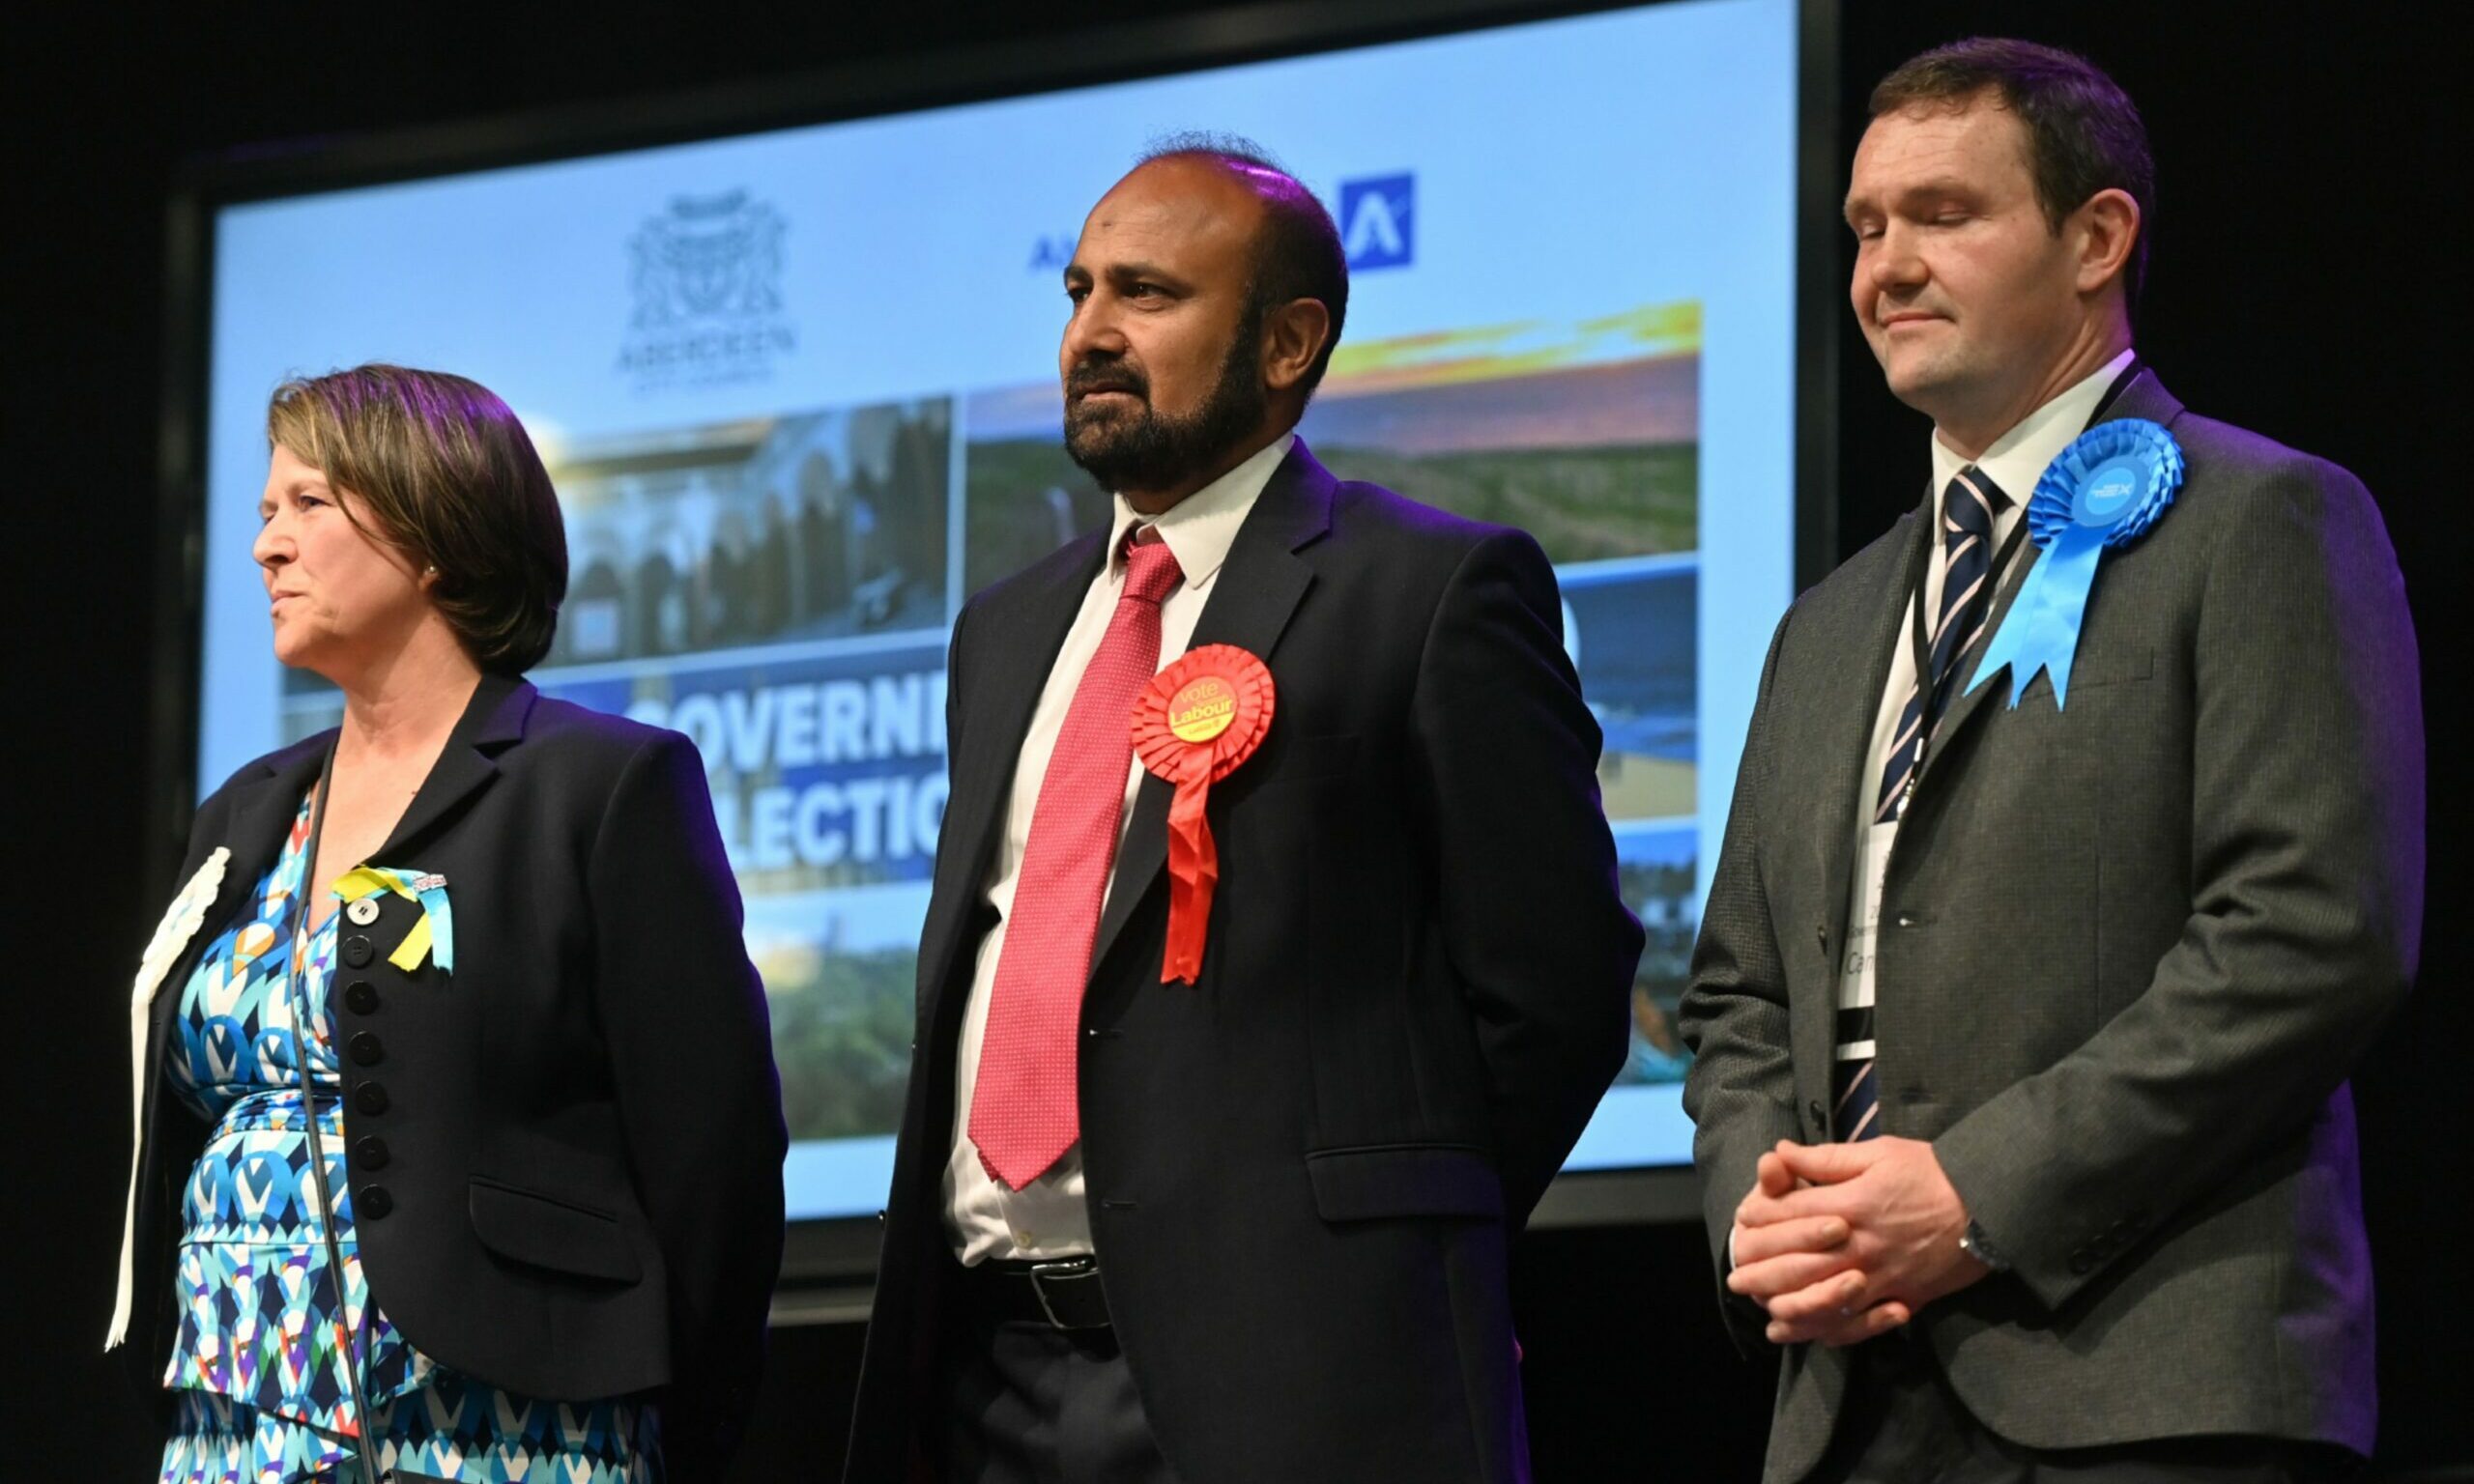 Tauqeer Malik, centre, was Aberdeen City Council's first Bame councillor. He was re-elected on Thursday. Picture by Scott Baxter/DCT Media.